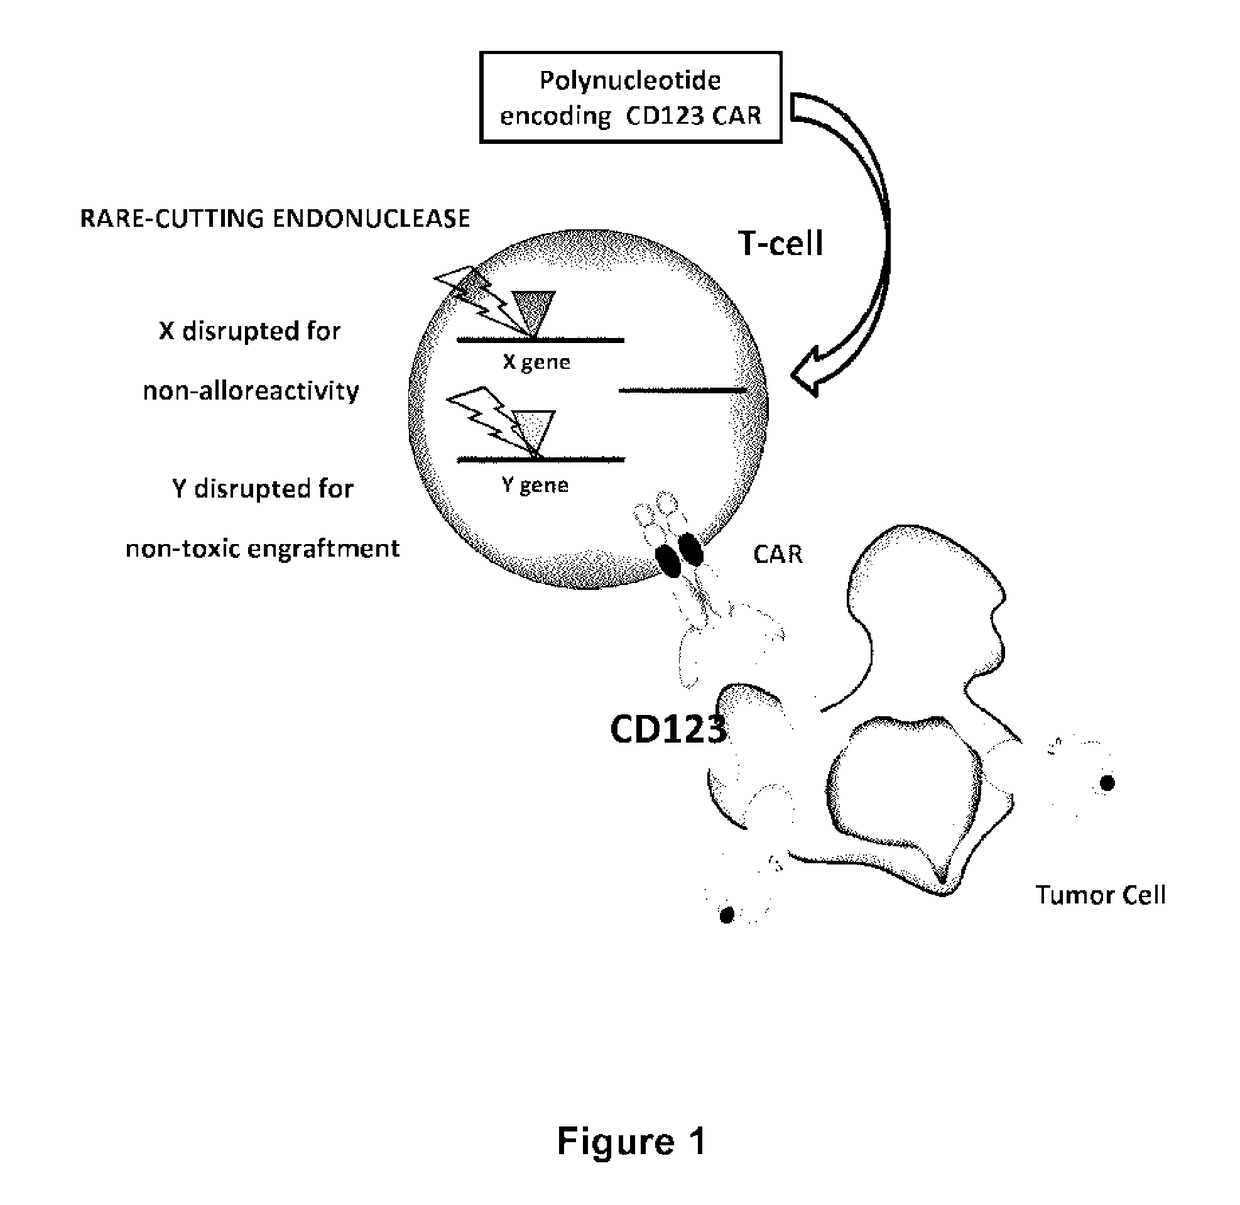 CD123 specific chimeric antigen receptors for cancer immunotherapy